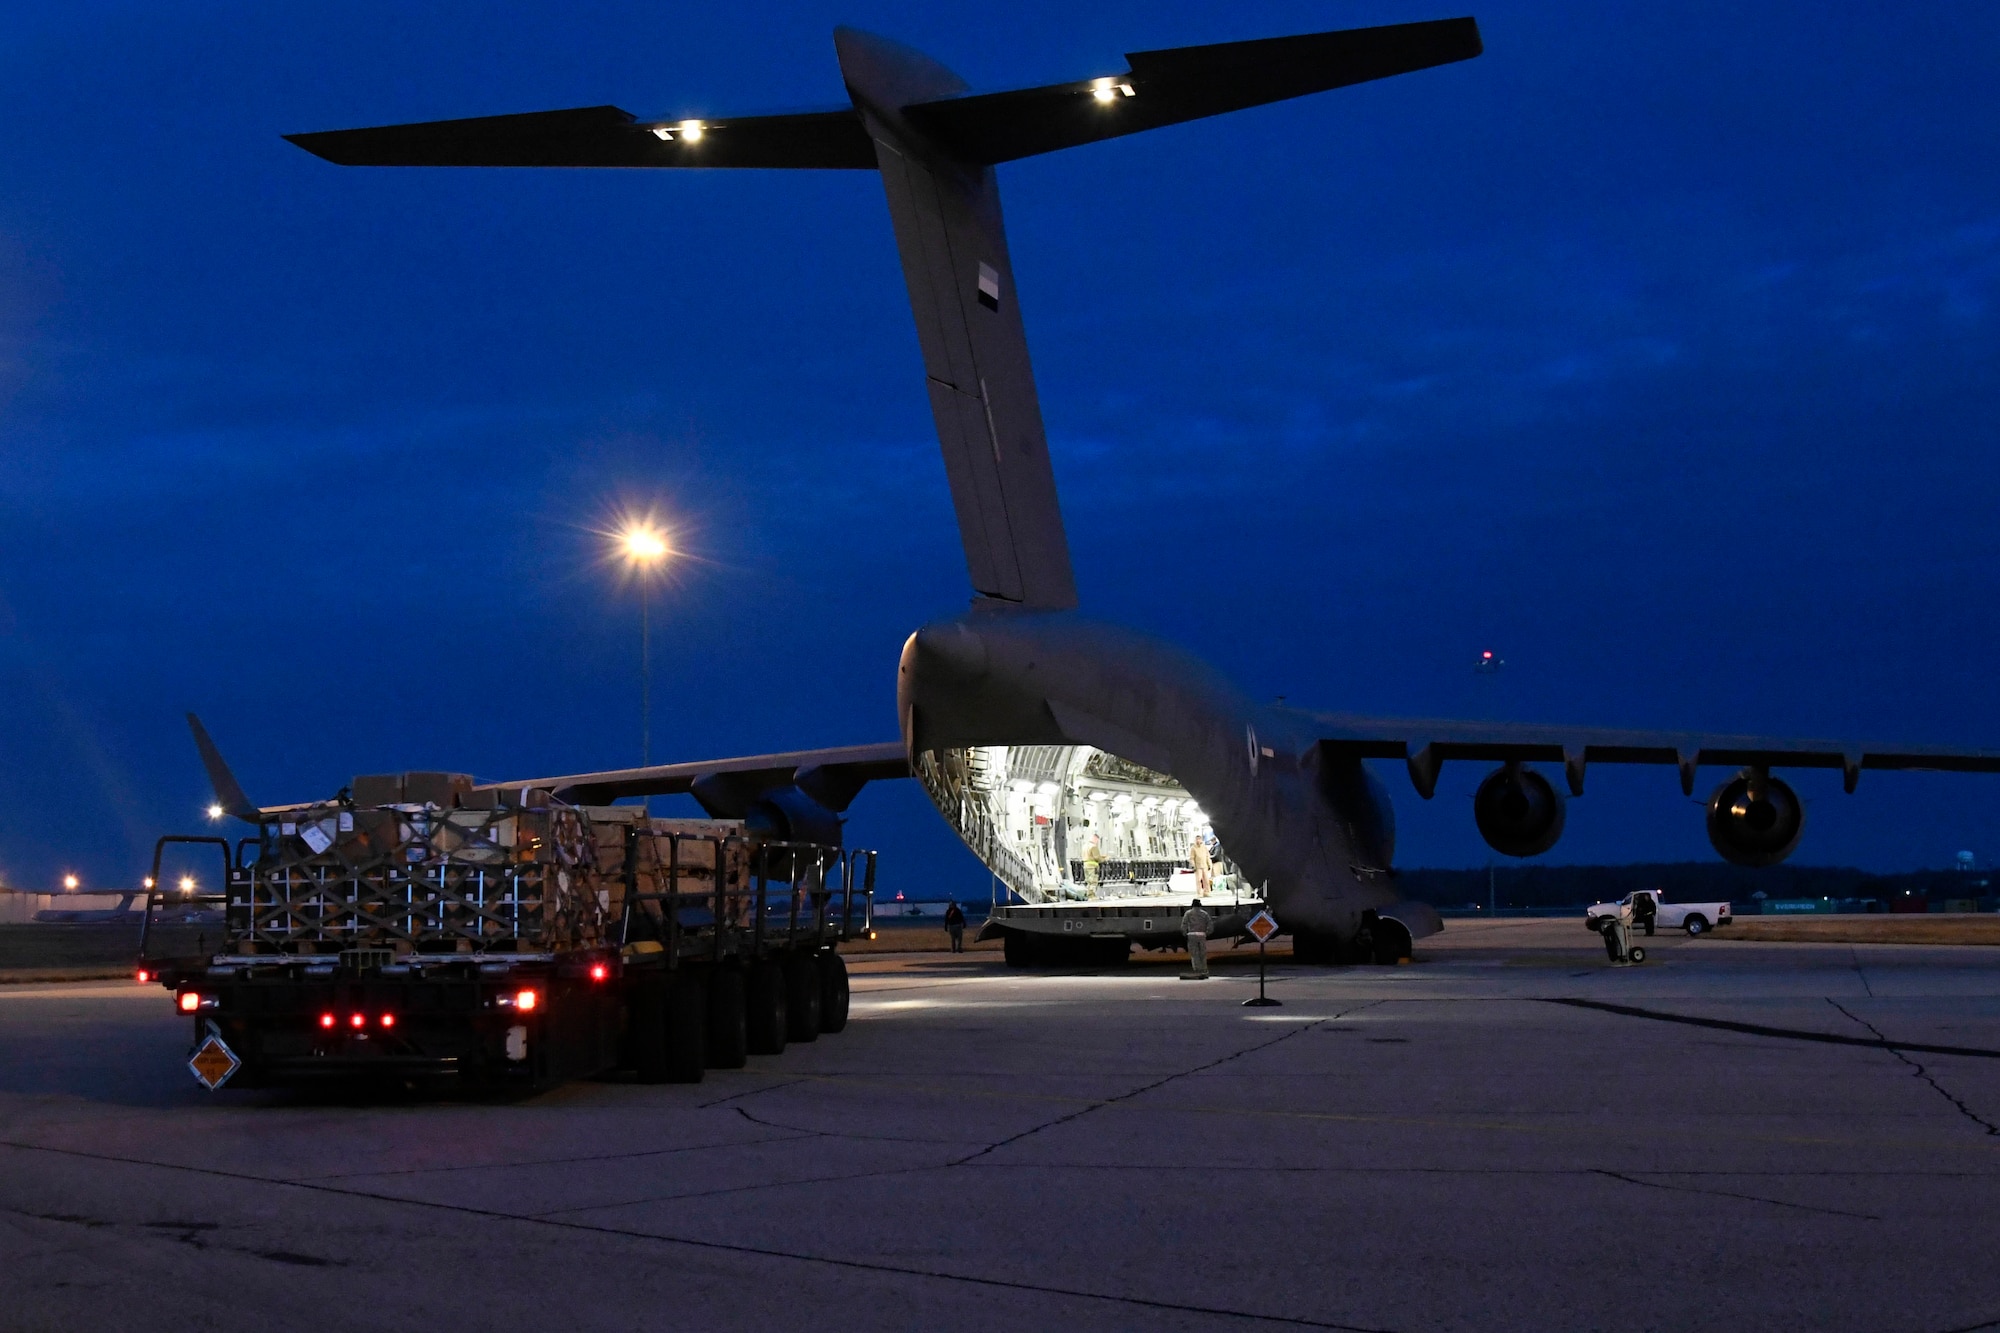 A K-loader moves into position behind a United Arab Emirates (UAE) air force C-17 Globemaster III Jan. 26, 2020, at Dover Air Force Base, Del. The K-loader was transporting cargo sold to the UAE through the foreign military sales program. (U.S. Air Force photo by Senior Airman Eric M. Fisher)